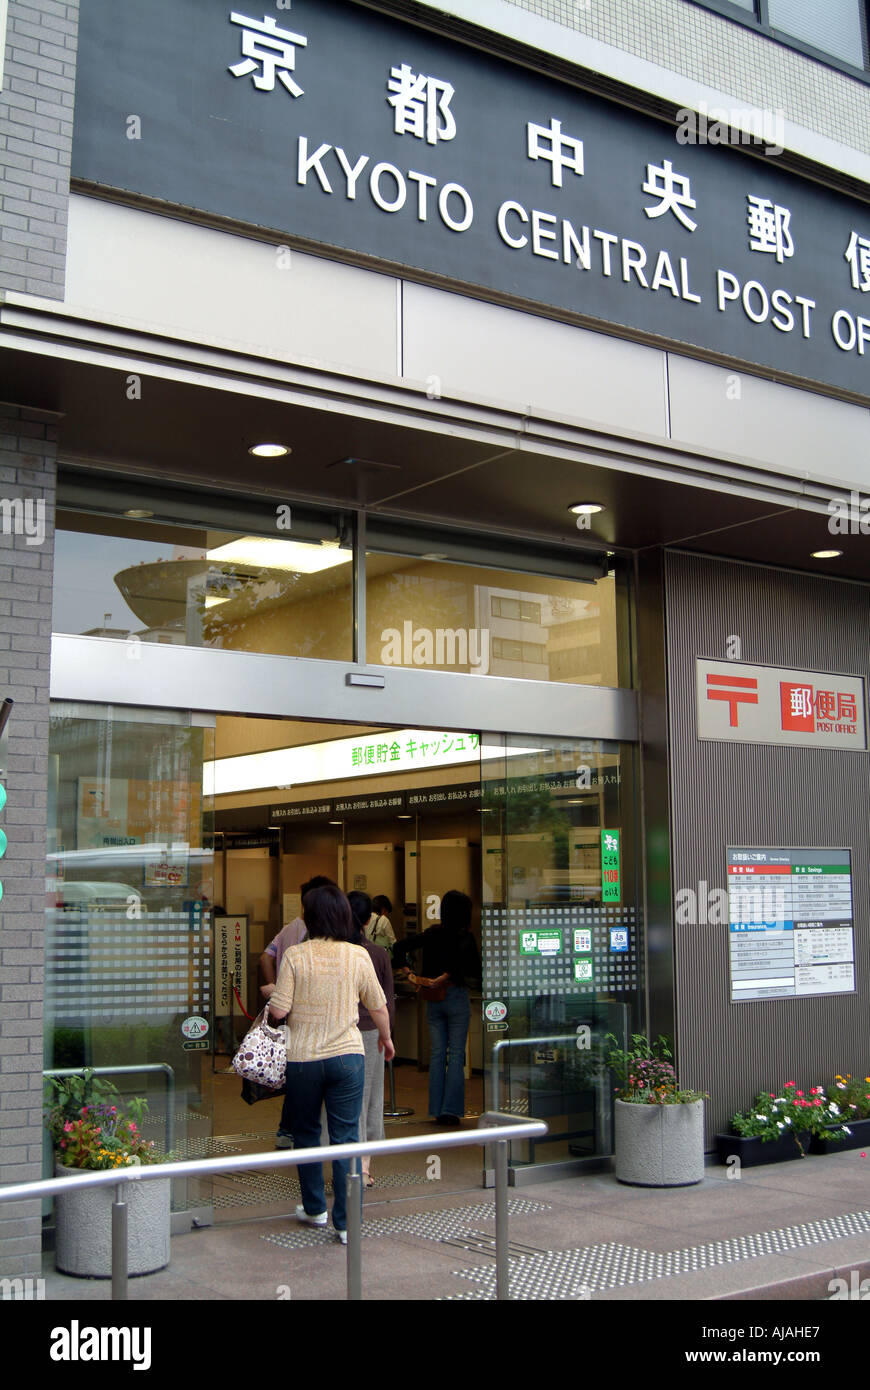 Kyoto Central Post Office Japan Stock Photo - Alamy